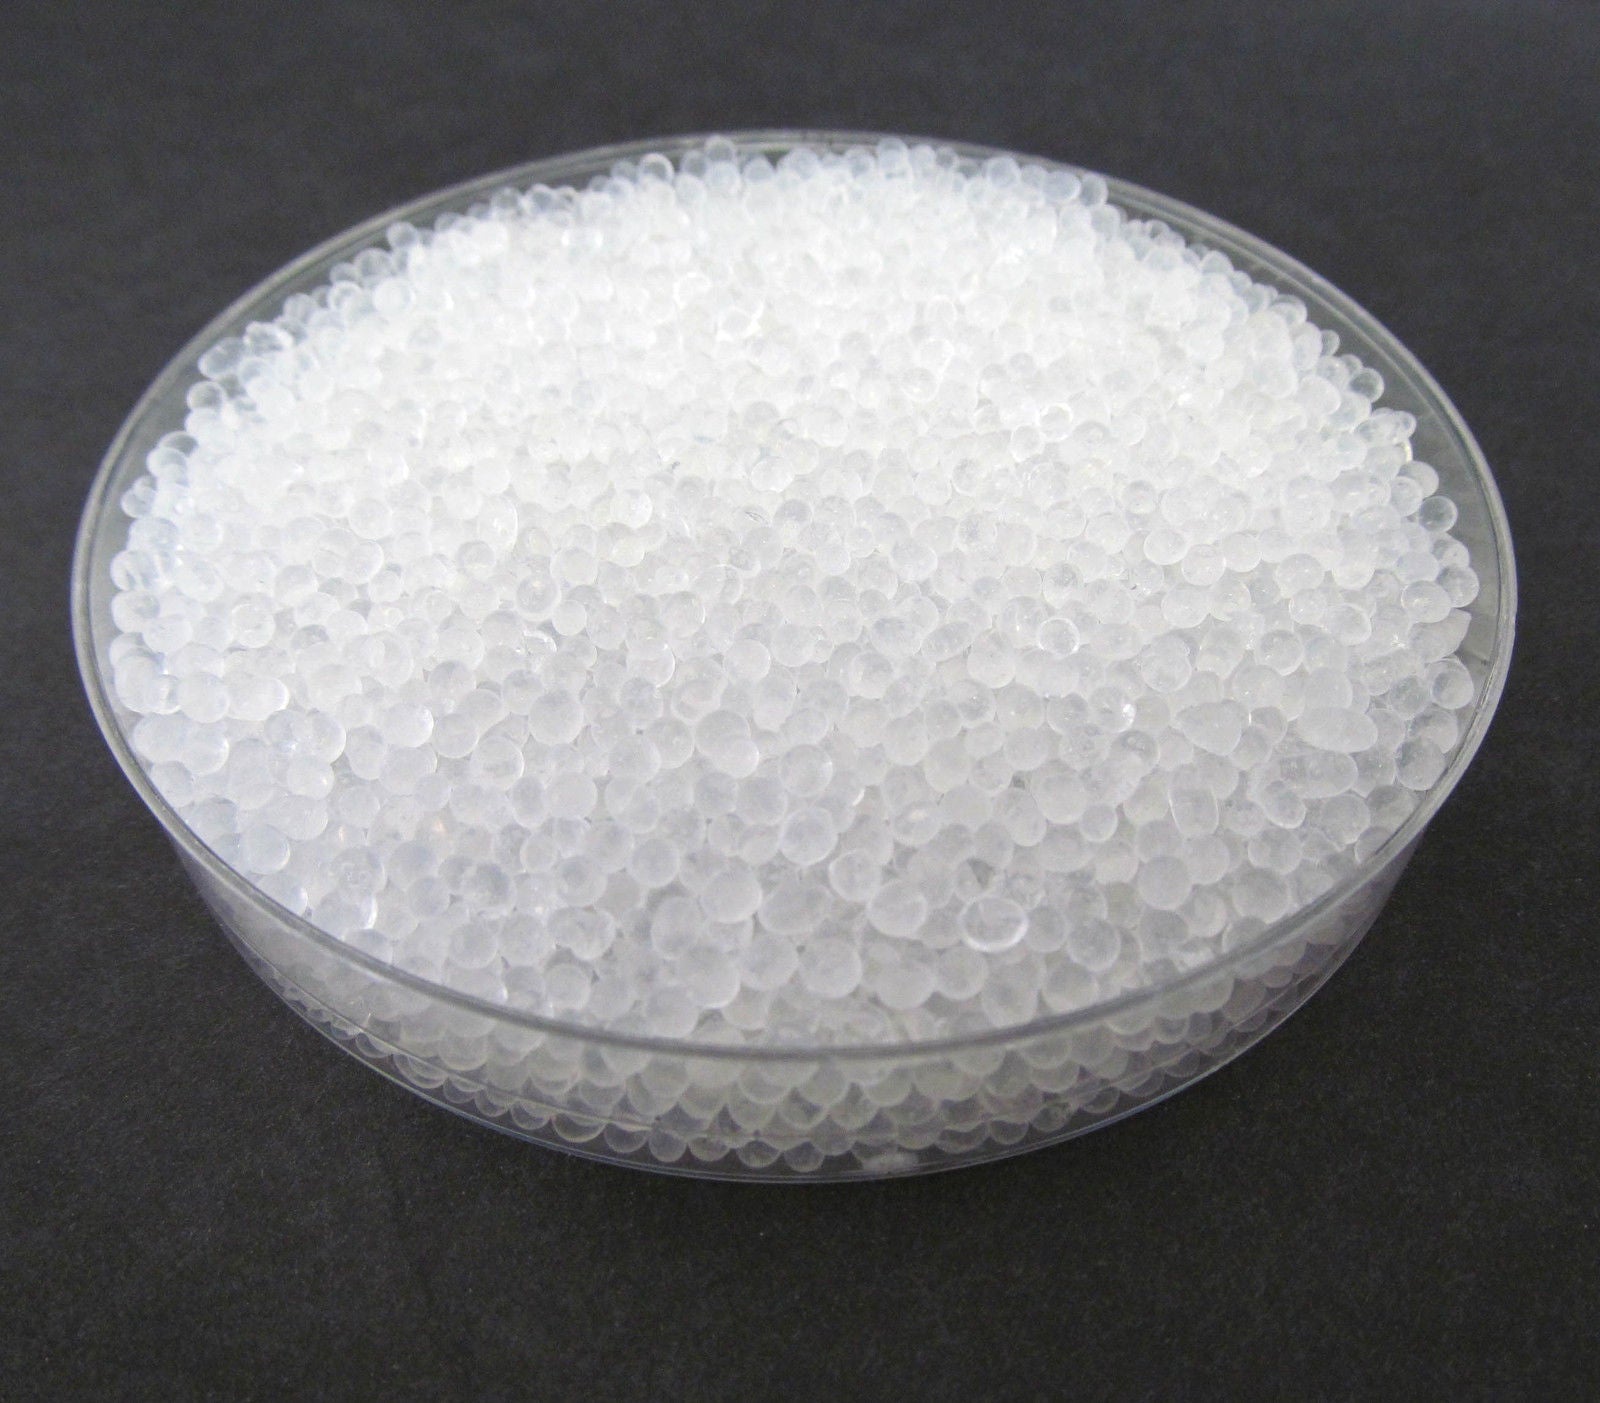 1 Gallon(7 LBS) Premium Pure White Silica Gel Beads - Rechargeable beads